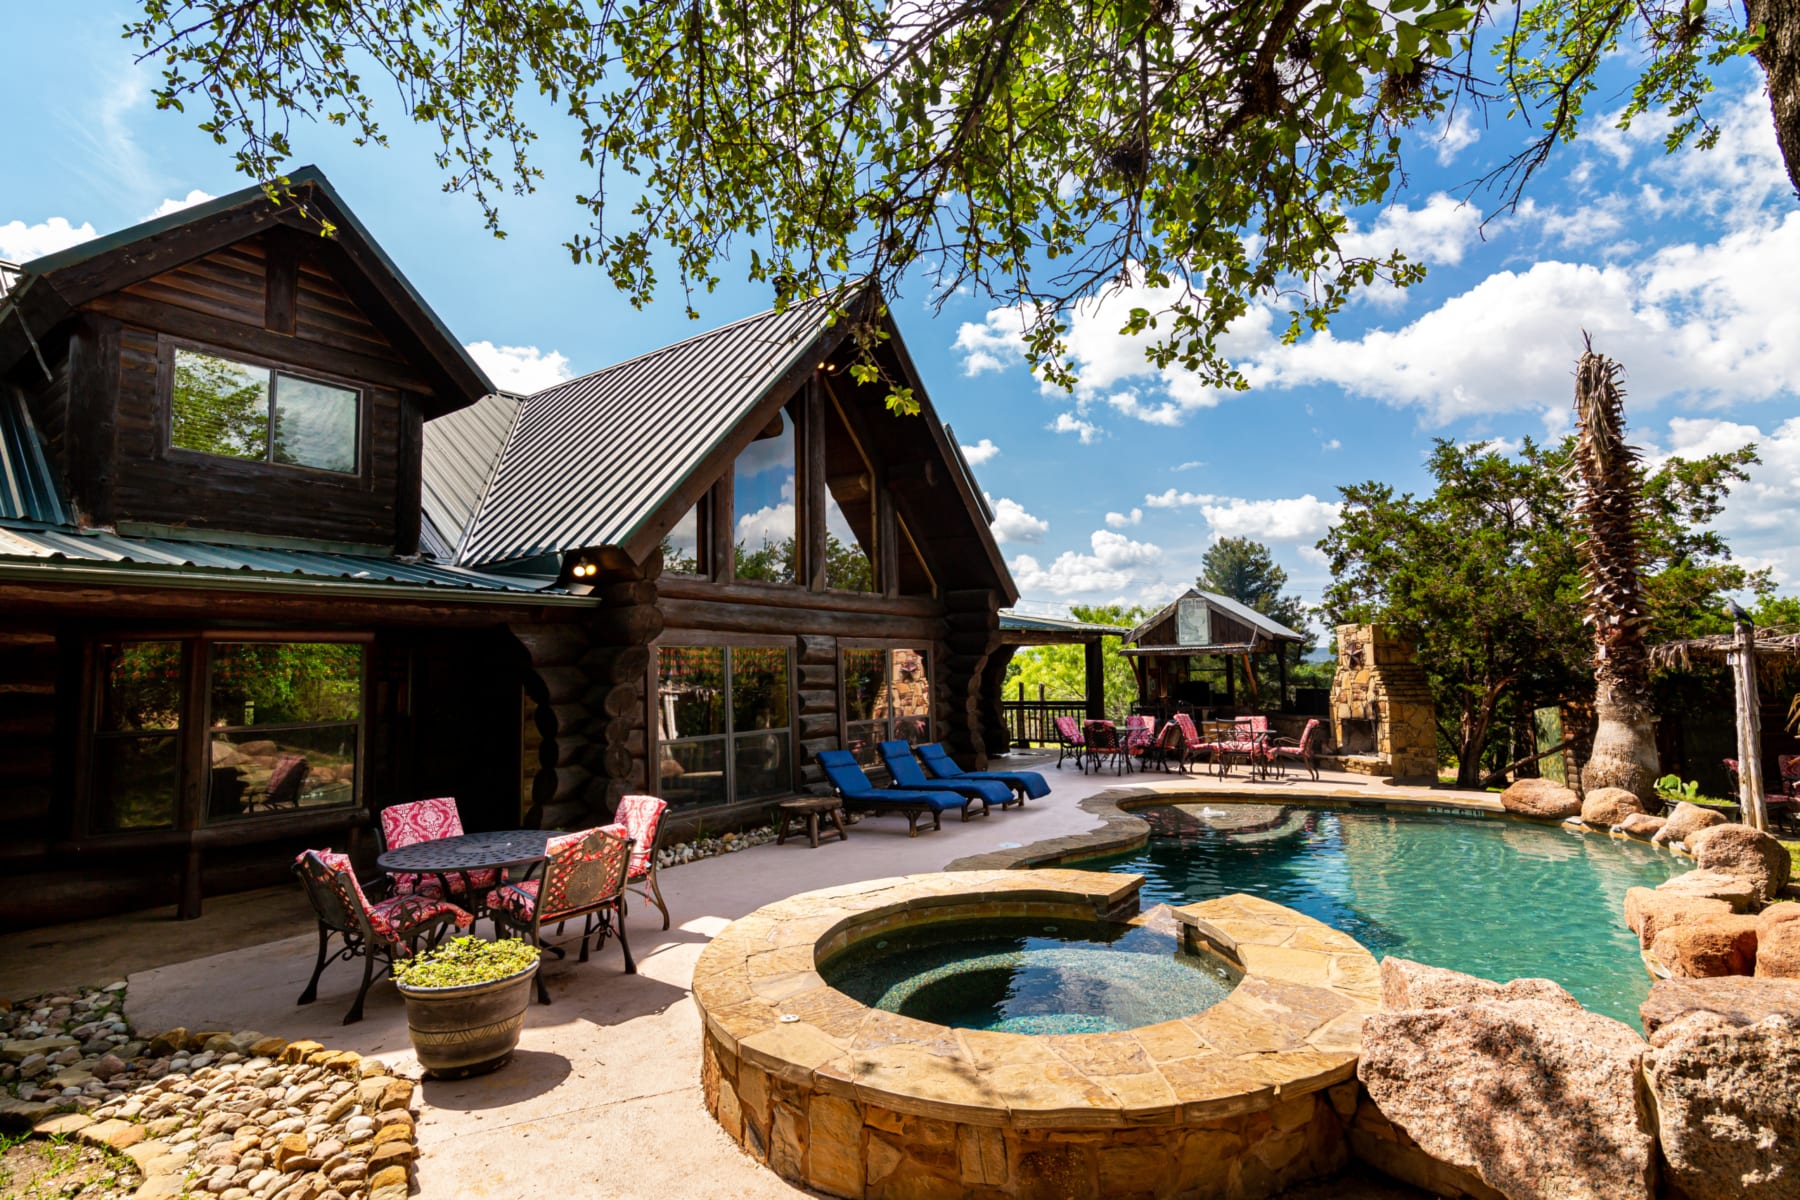 Cabin Fever - ourdoor pool and hot tub.